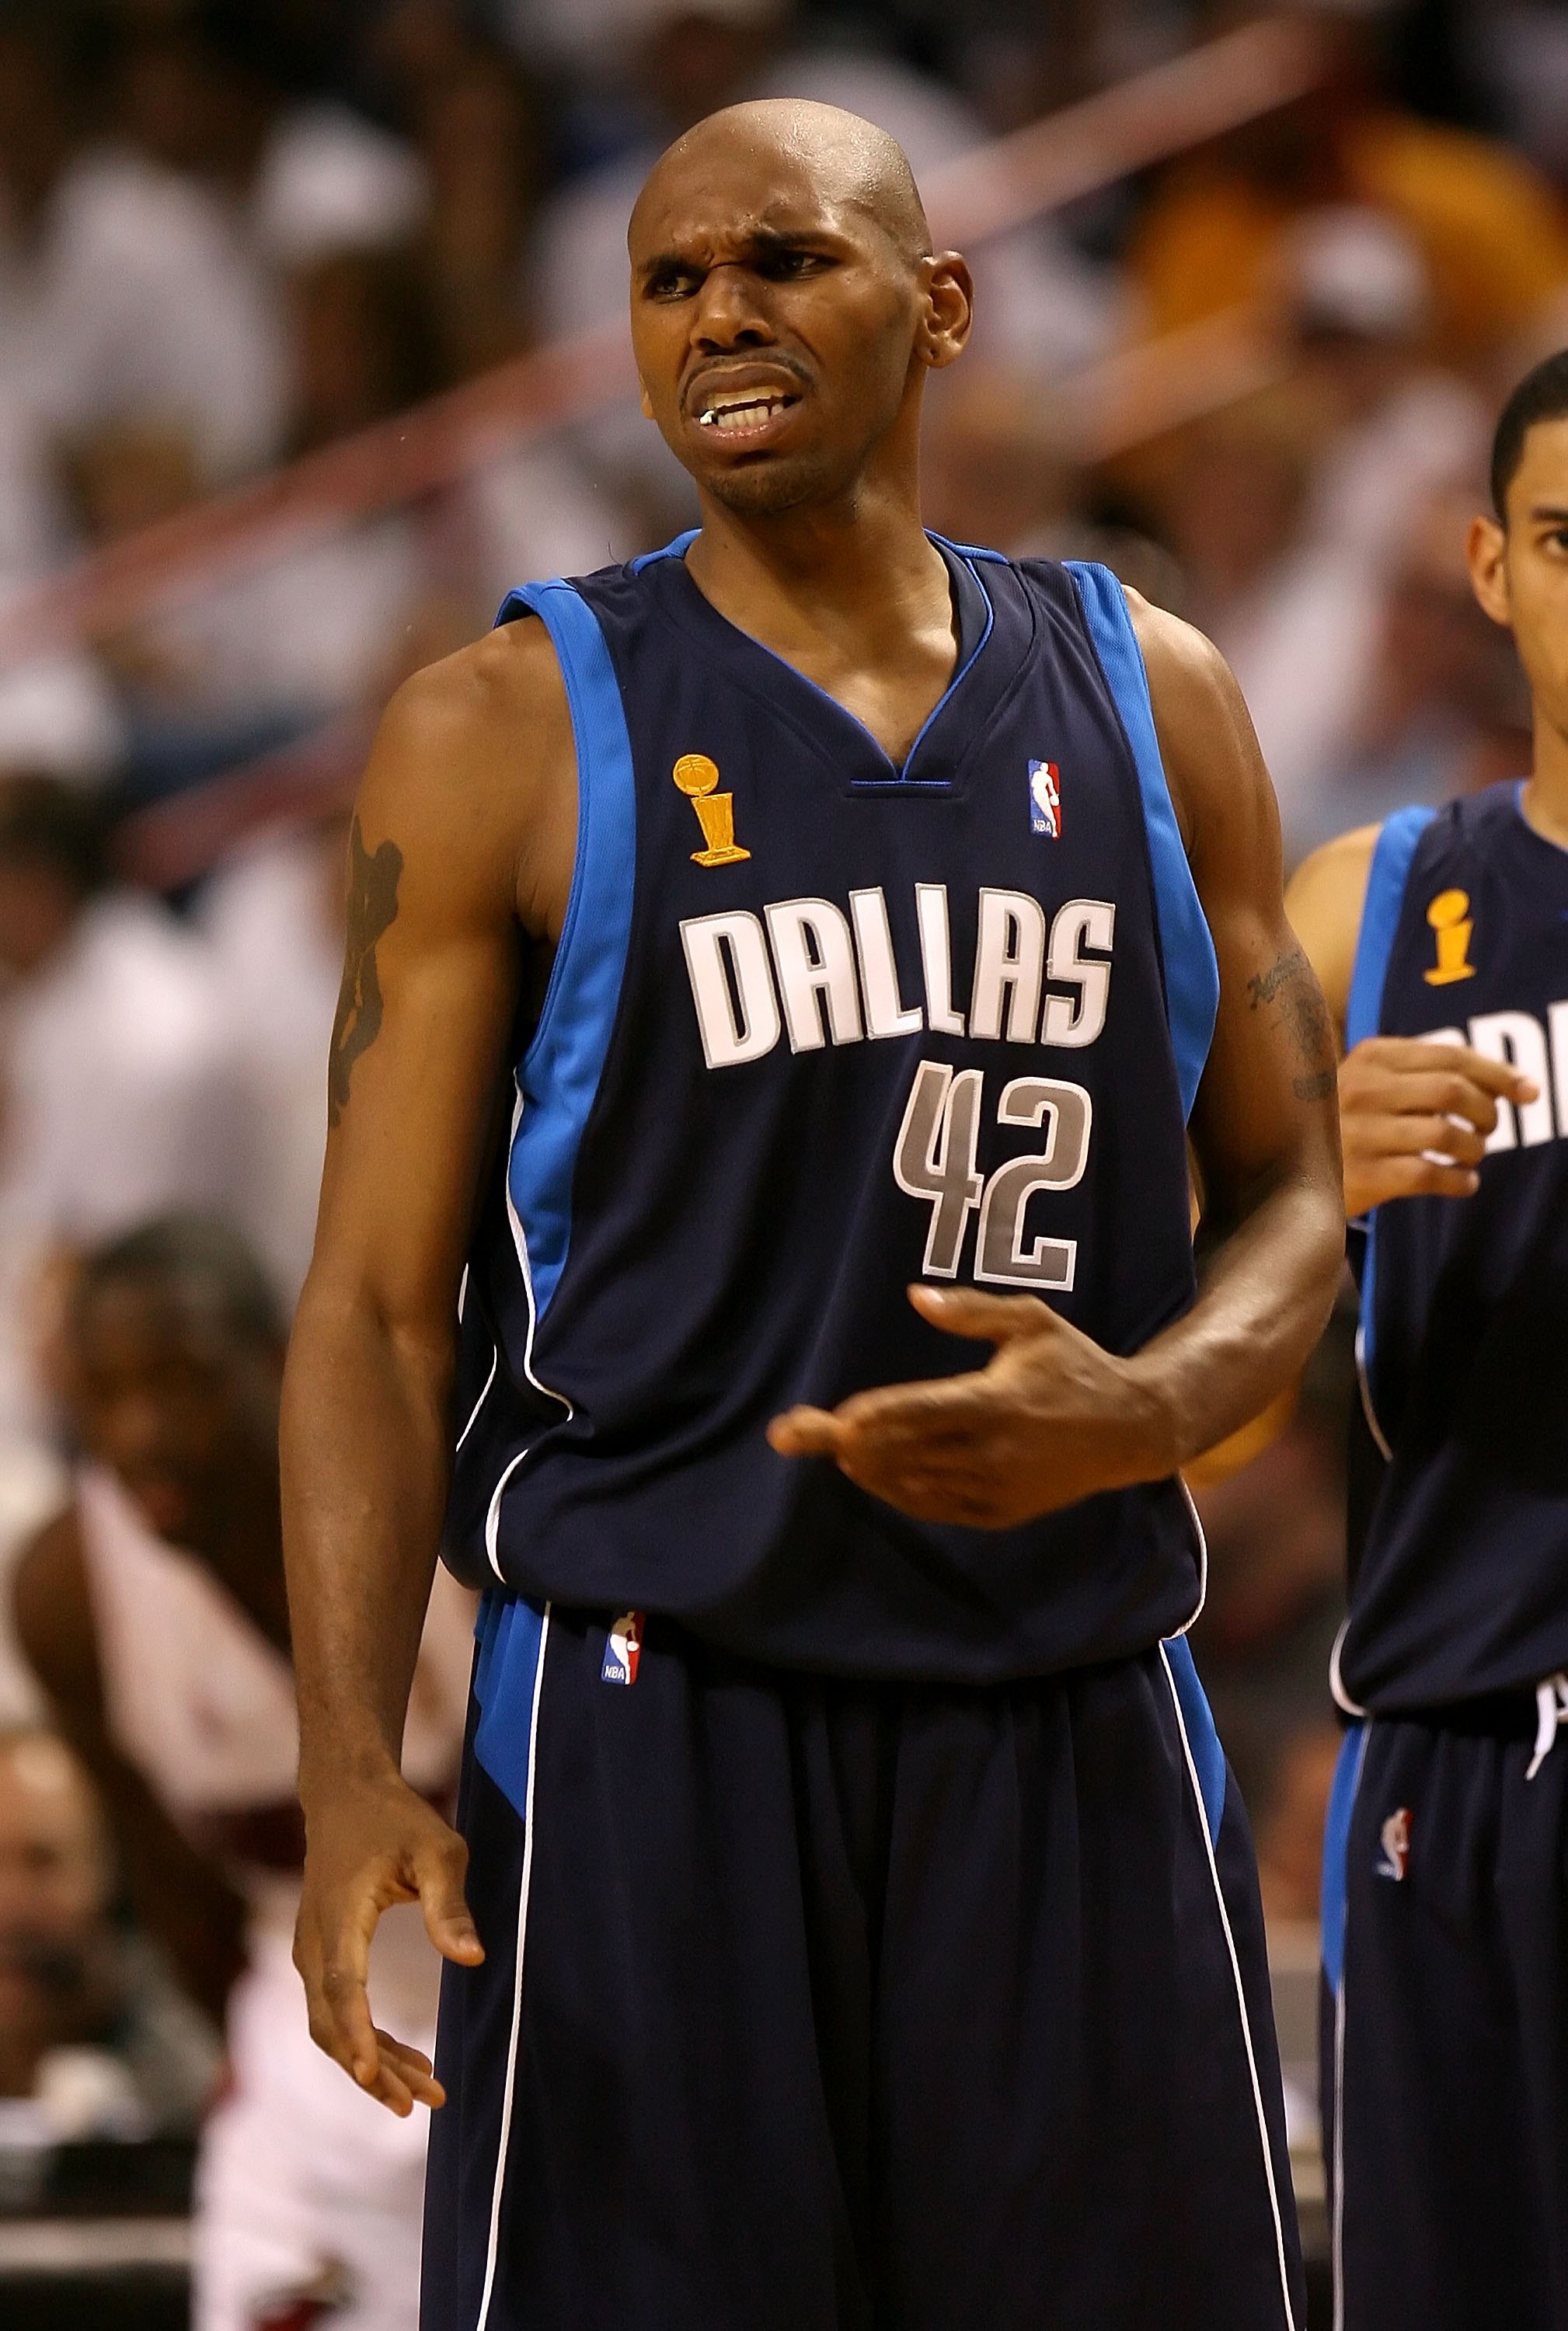 Jerry Stackhouse On His Way To Miami Heat?: Why Miami Would Be